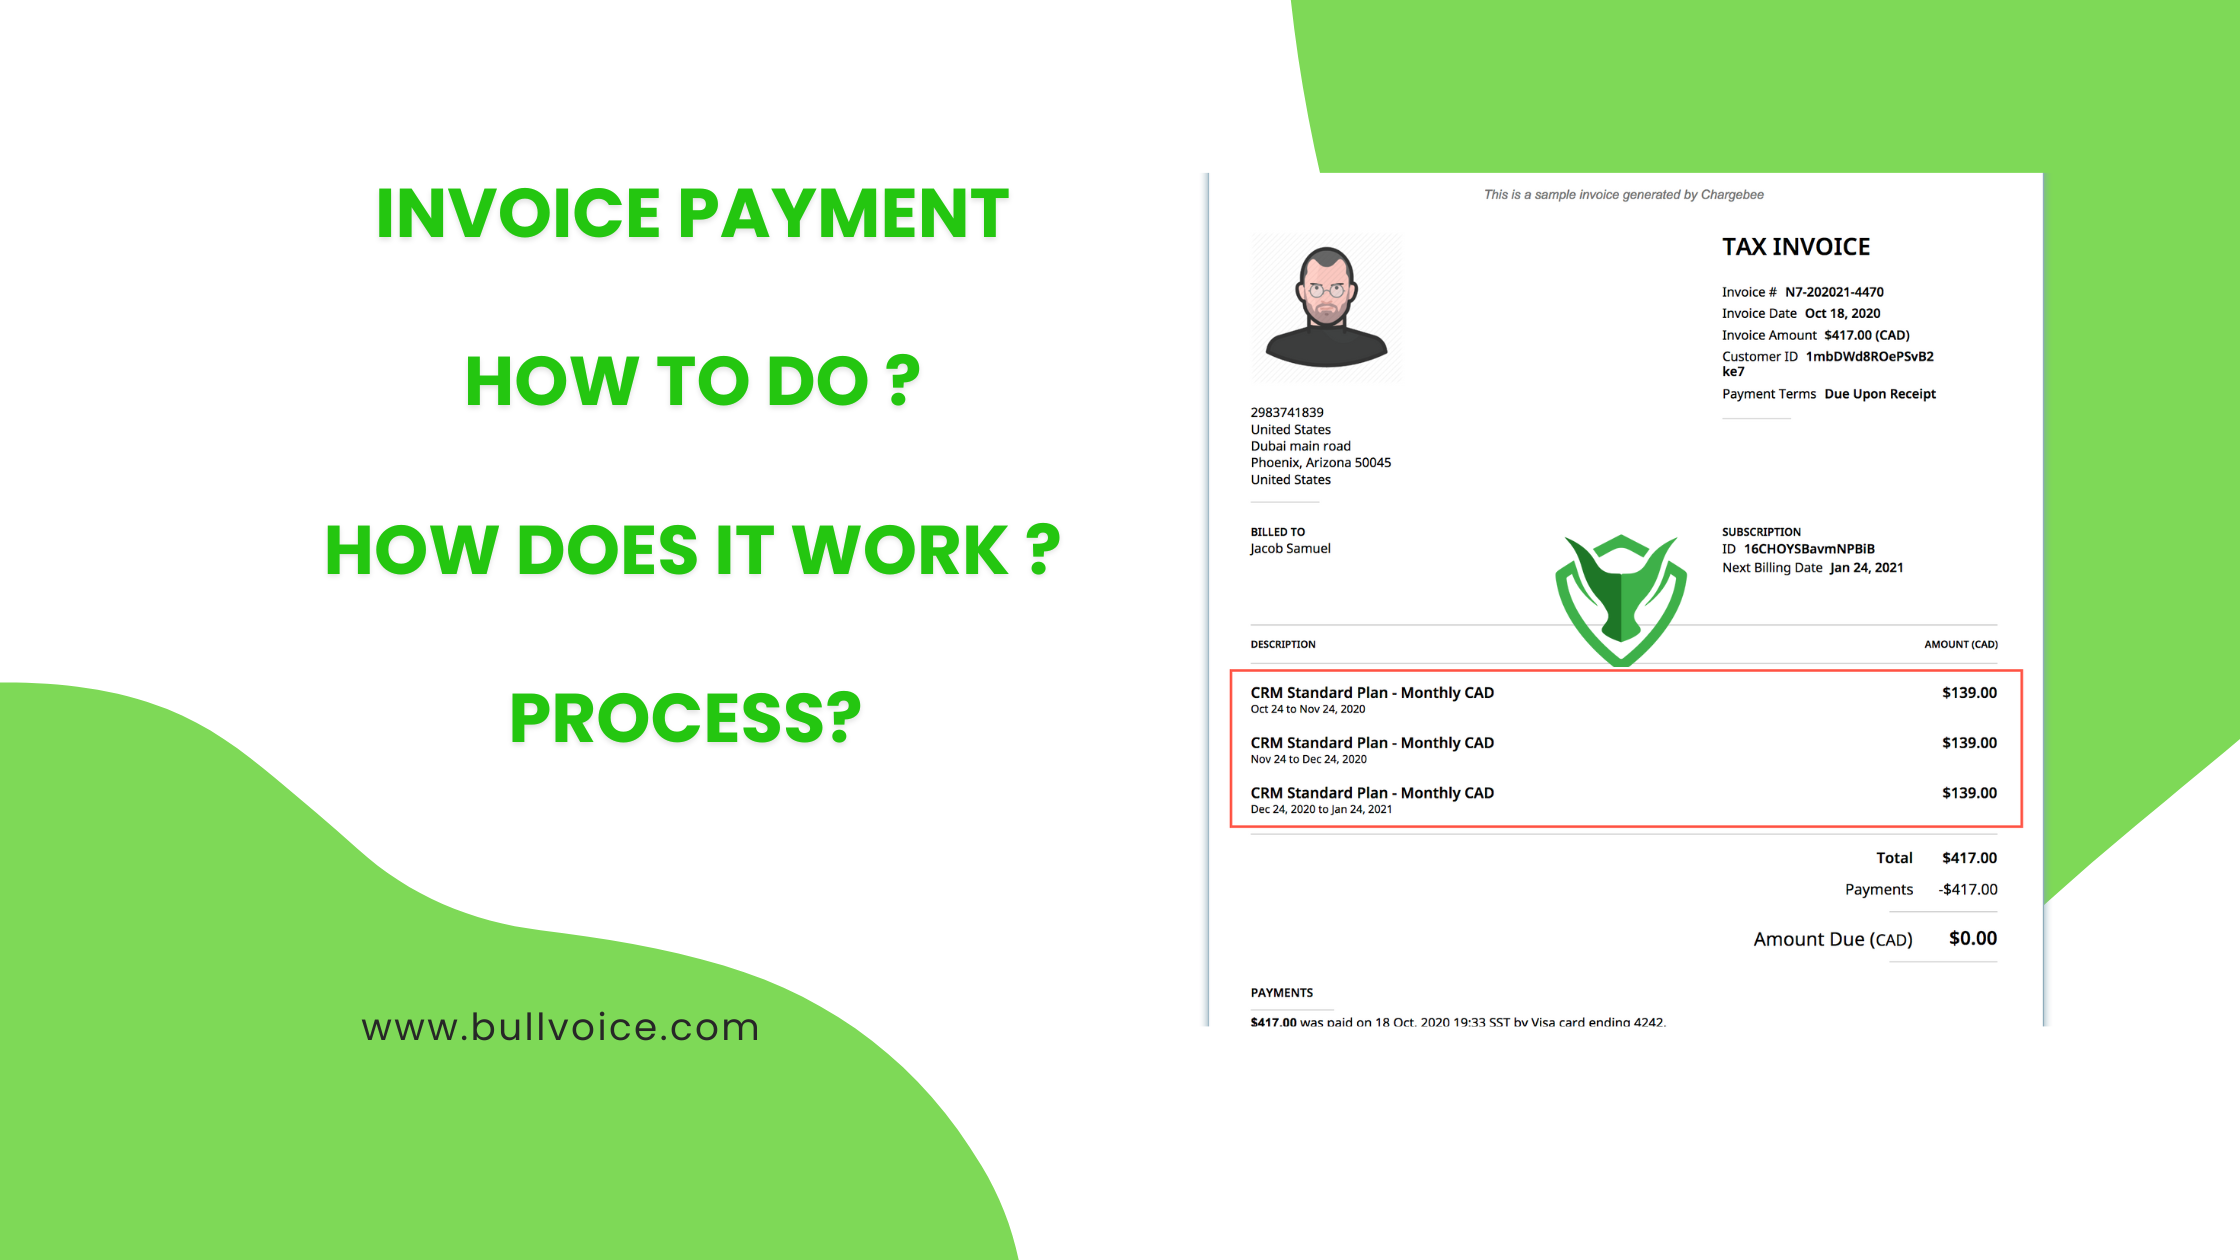 How to do invoice payment in singapore how does it work and process